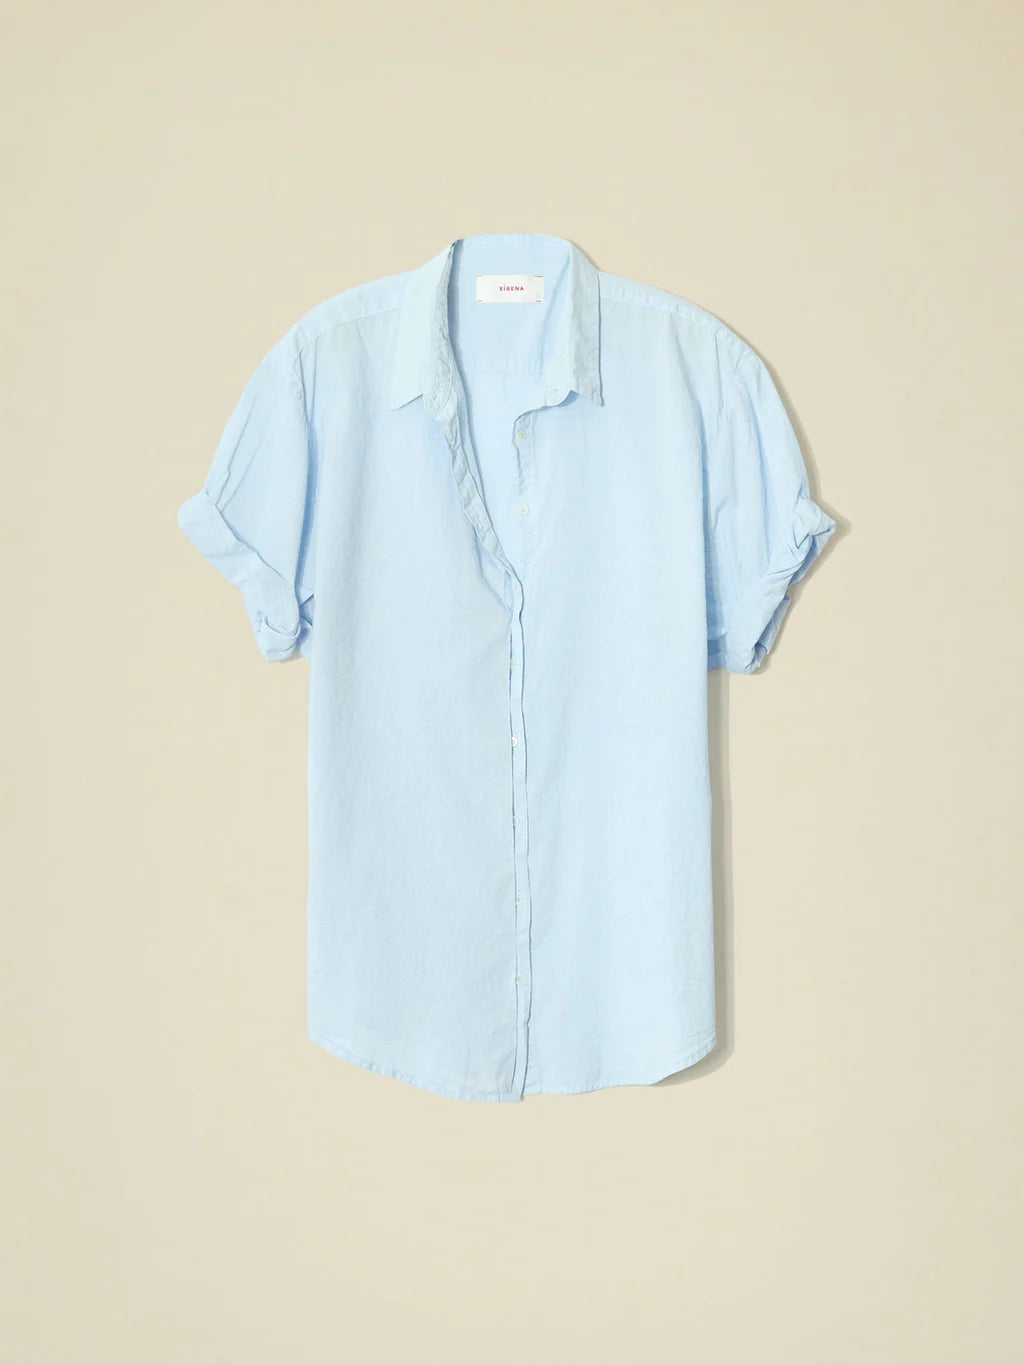 Channing Shirt in Baby Blue